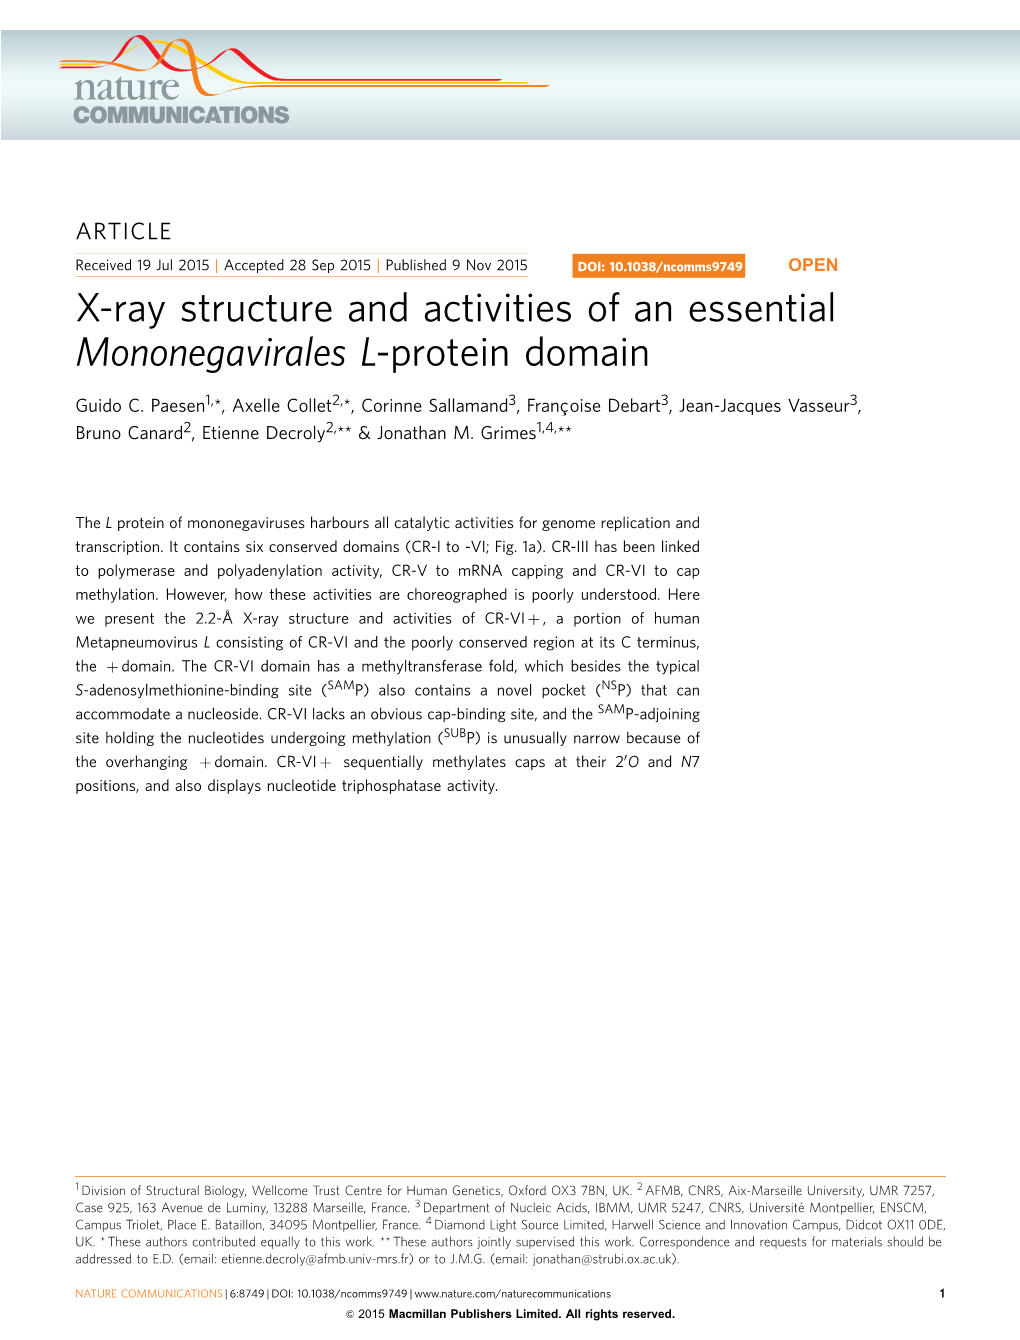 X-Ray Structure and Activities of an Essential Mononegavirales L-Protein Domain